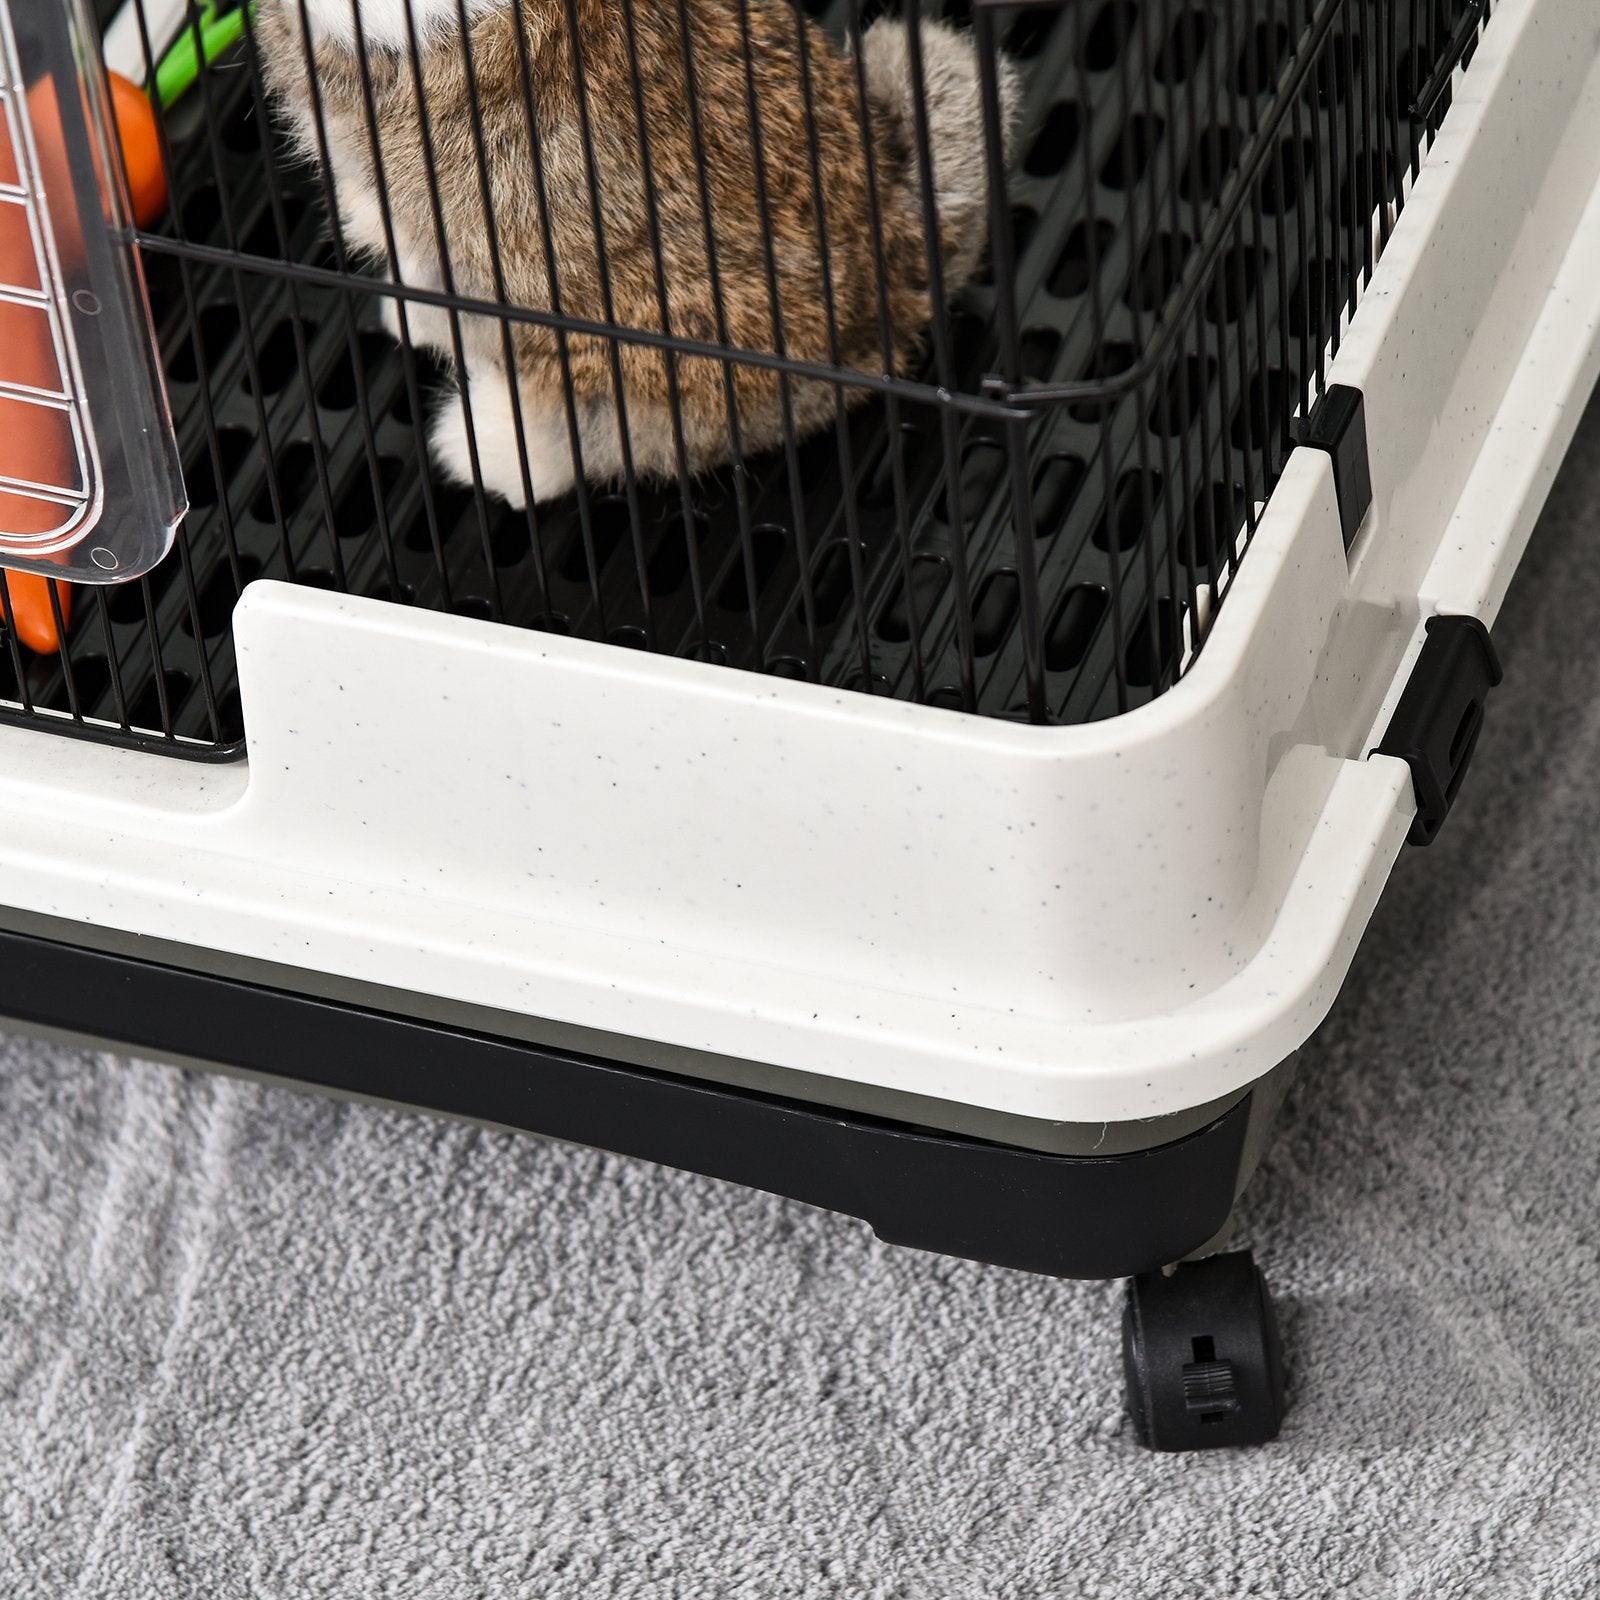 Small Animal Steel Wire Cage w/ Waste Tray Black